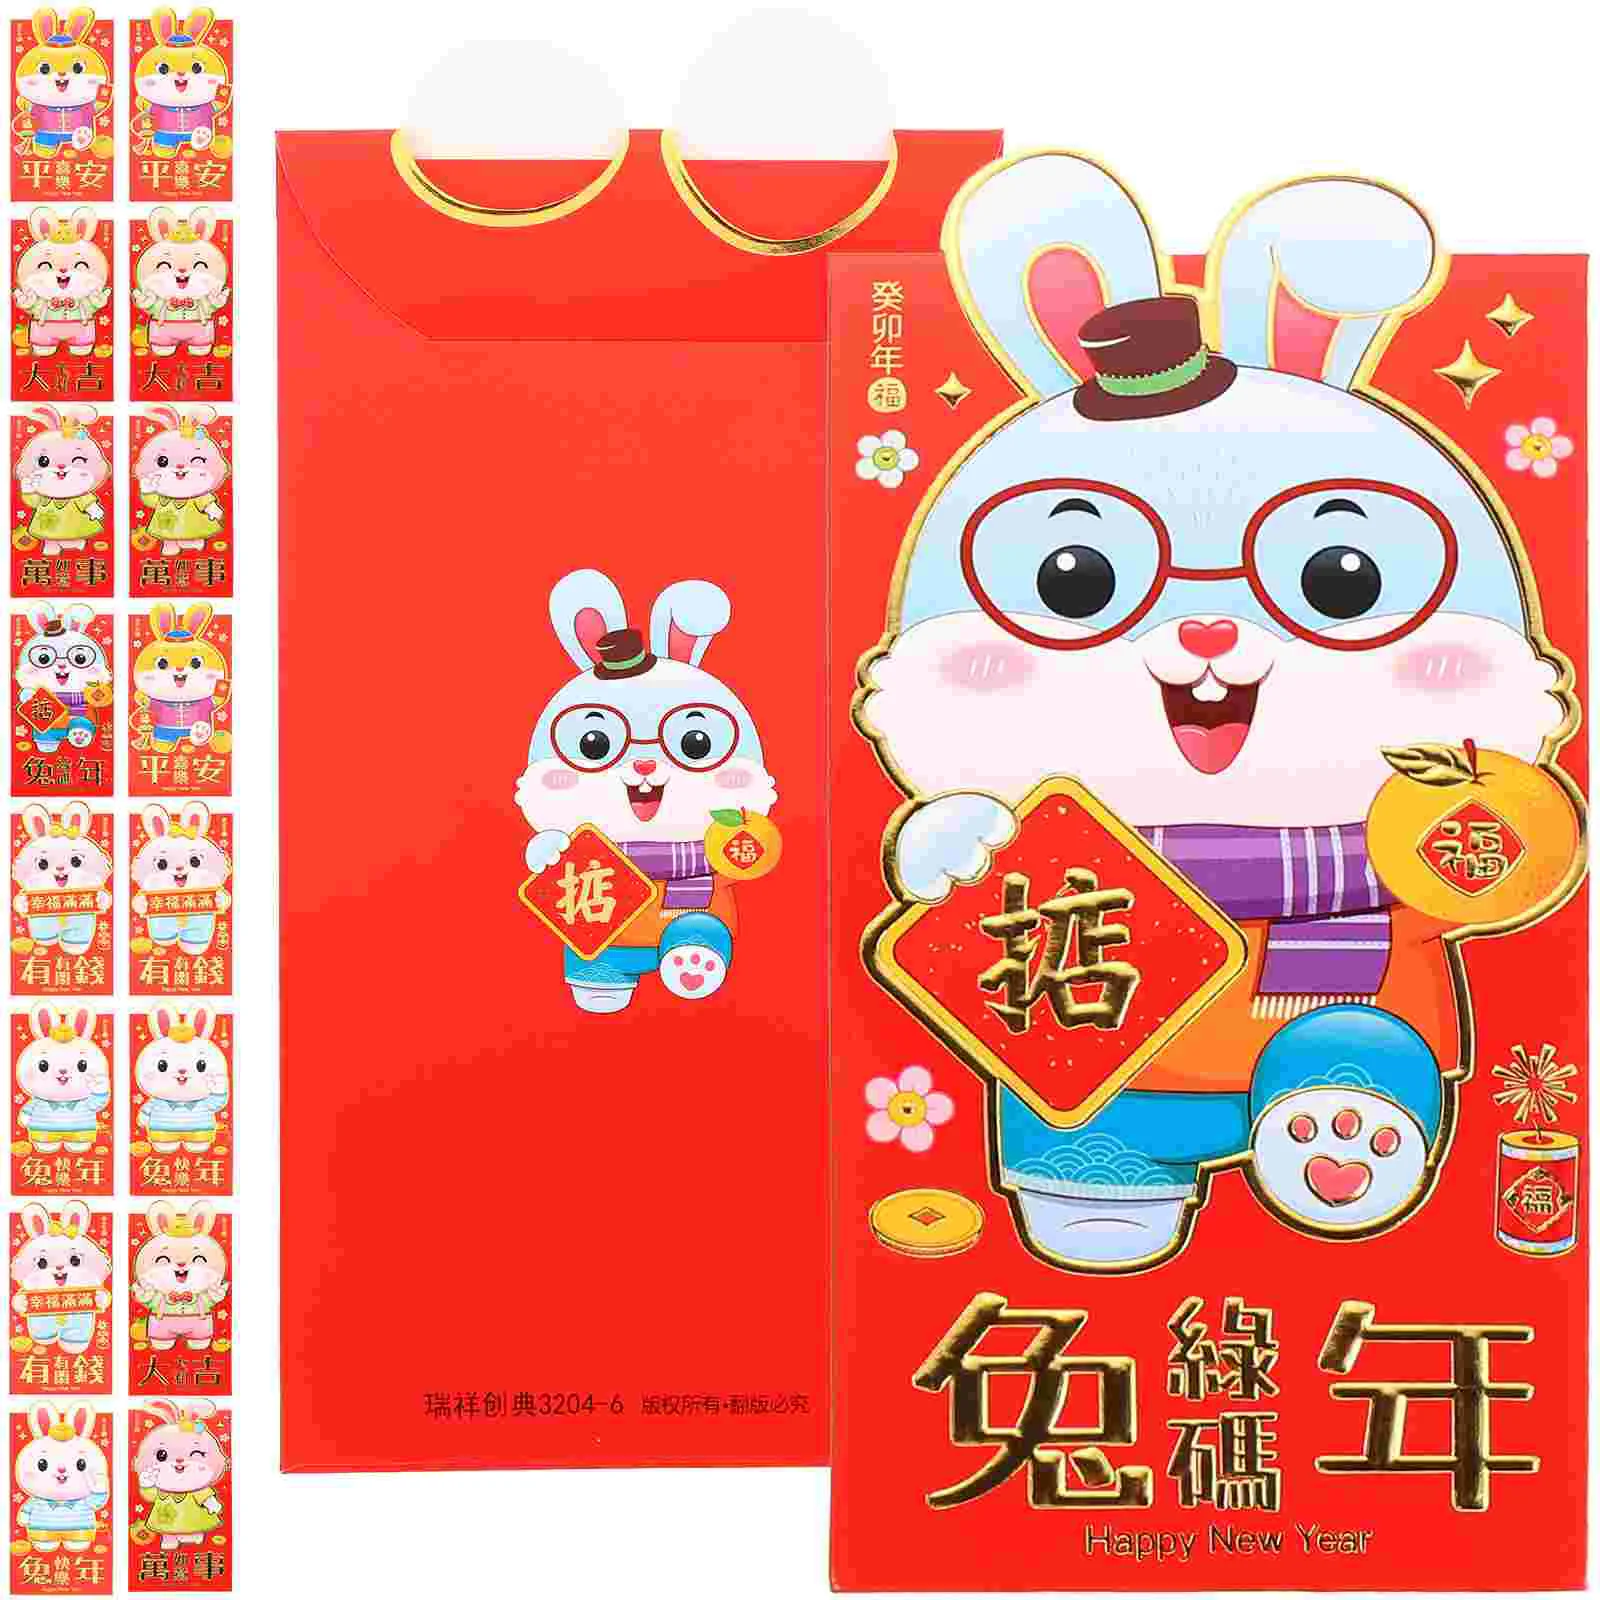 

Red Envelopes Year Money New Chinese Envelope Rabbitpacket The Lucky Lunar Pocket Pockets China Hong Bao Asian Festival Spring